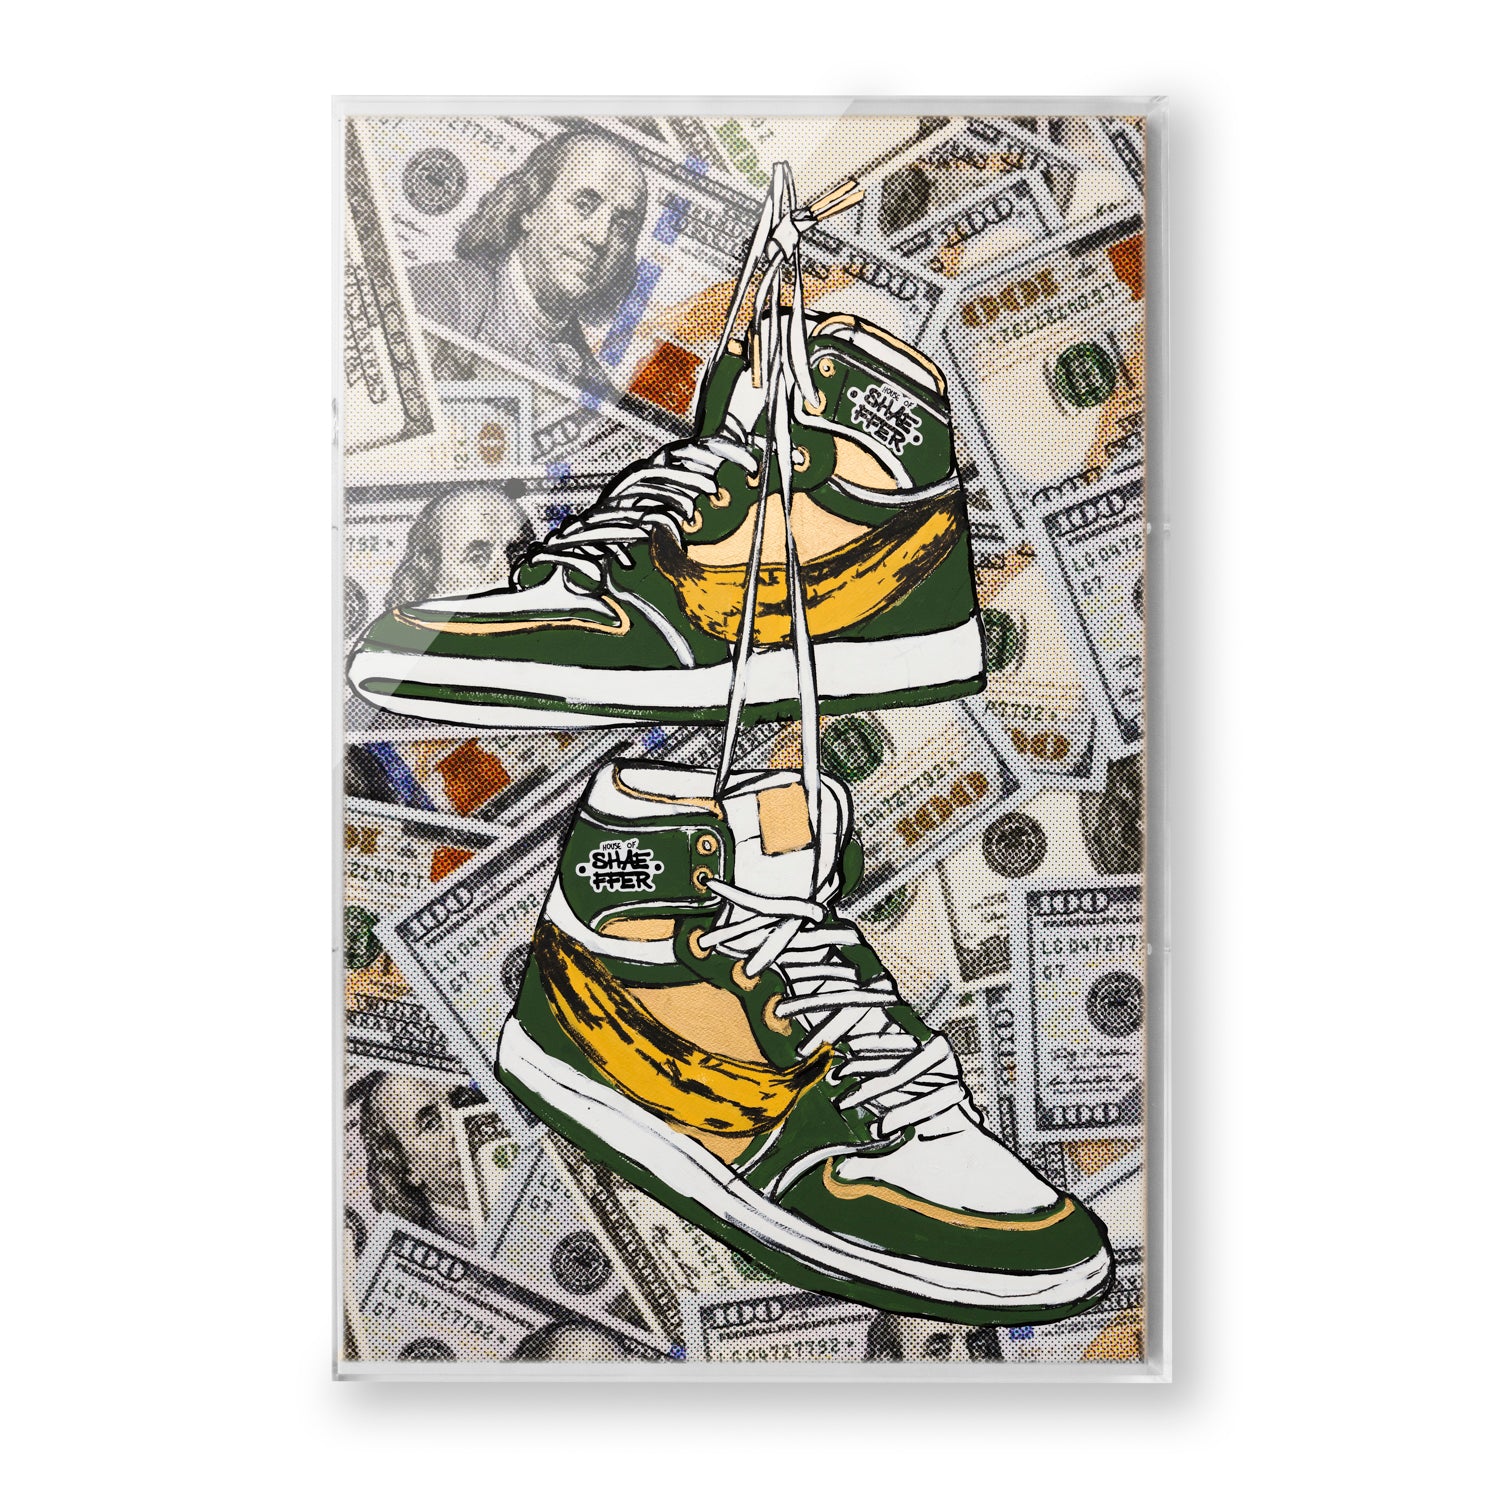 Paid in Full by Michael Shaeffer